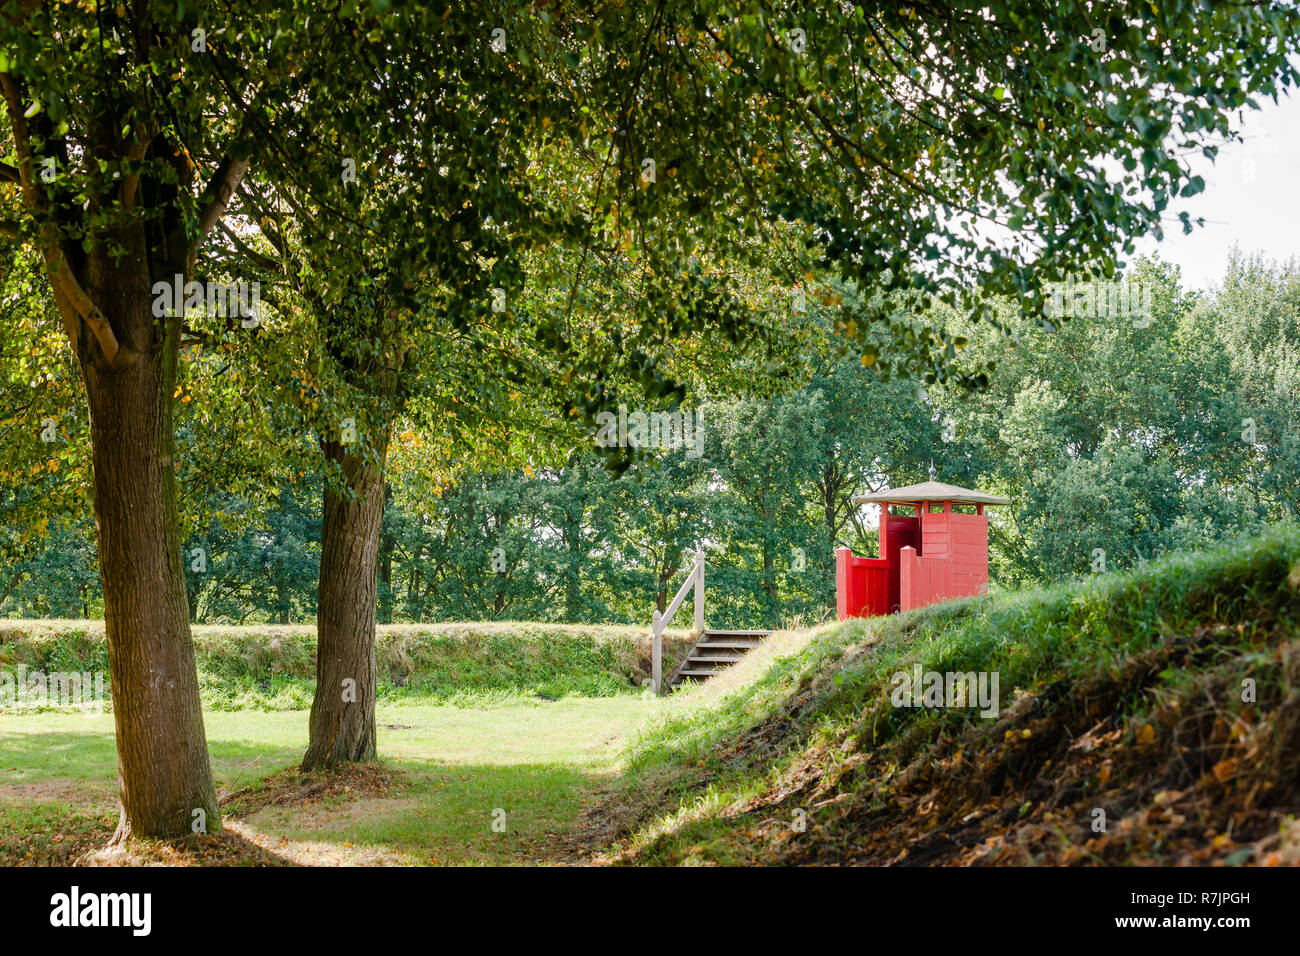 Observation post on a defense wall of historic fortress town of Bourtange, Groningen in Netherlands Stock Photo